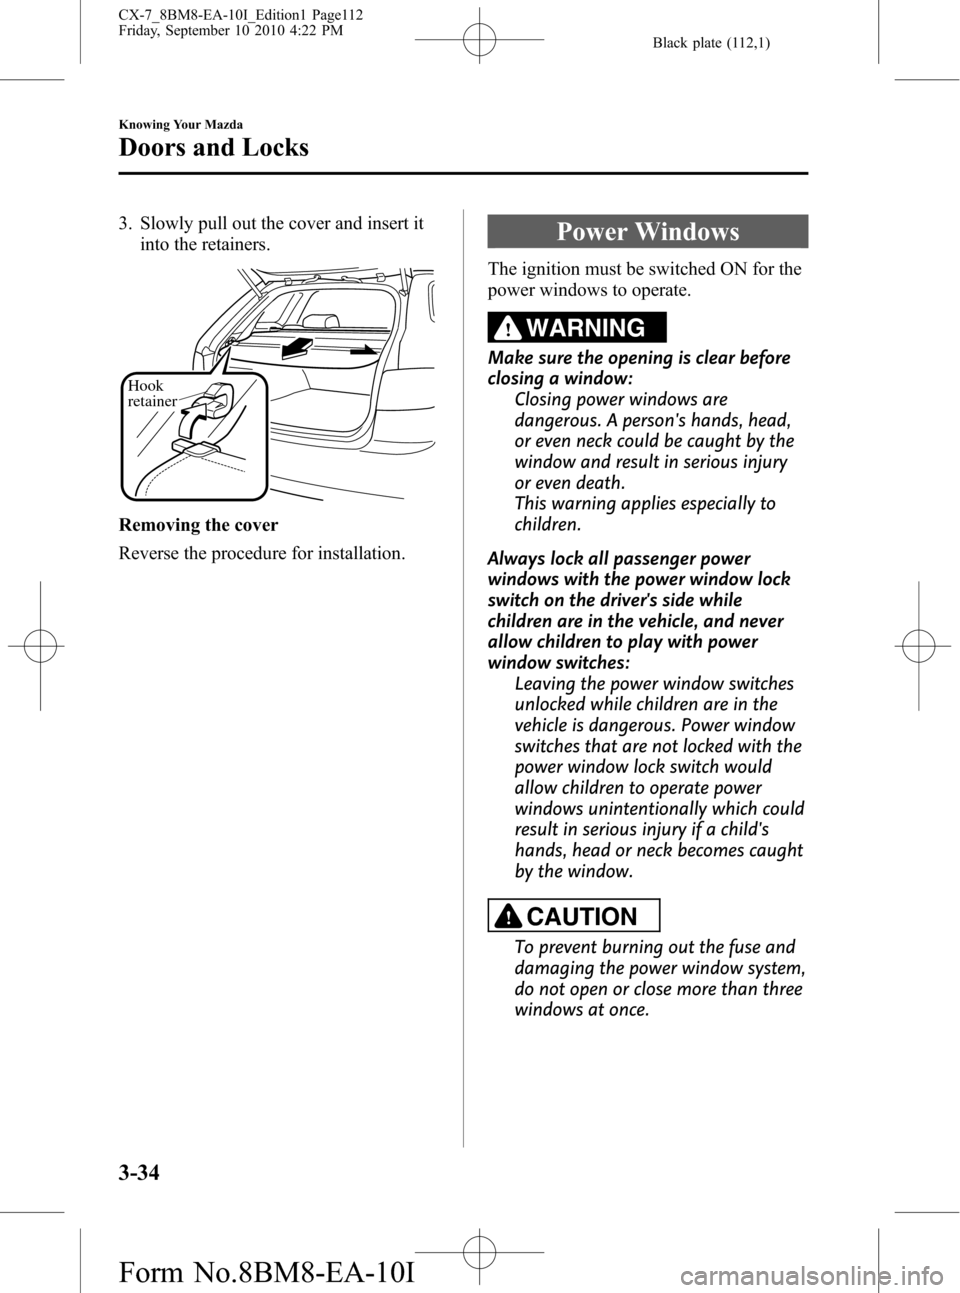 MAZDA MODEL CX-7 2011  Owners Manual (in English) Black plate (112,1)
3. Slowly pull out the cover and insert it
into the retainers.
Hook 
retainer
Removing the cover
Reverse the procedure for installation.
Power Windows
The ignition must be switched